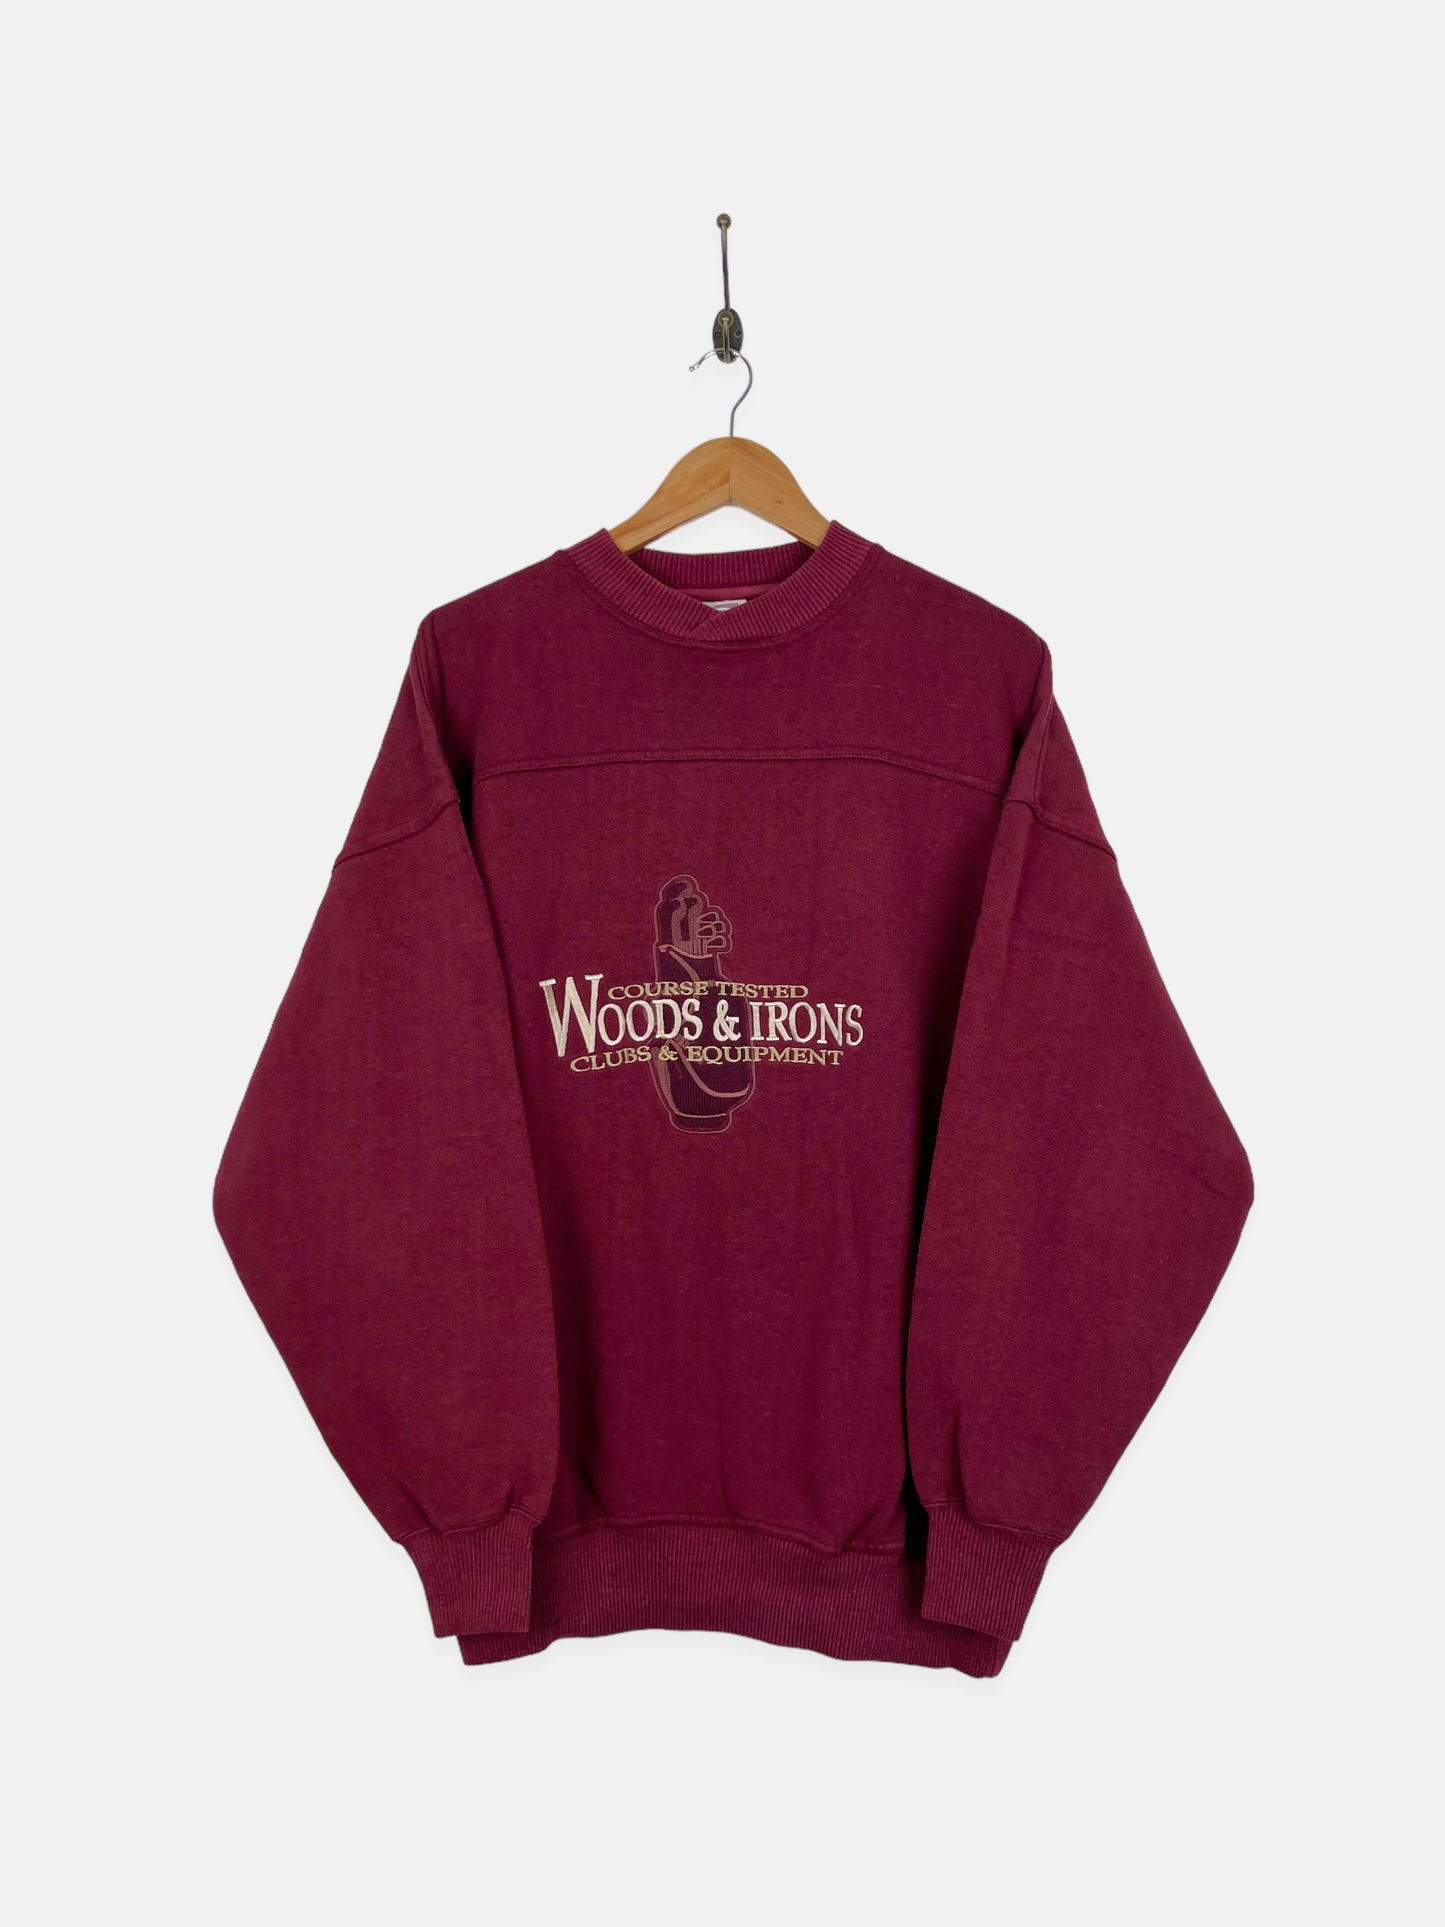 90's Golf Woods & Irons Embroidered Vintage Sweatshirt Size XL